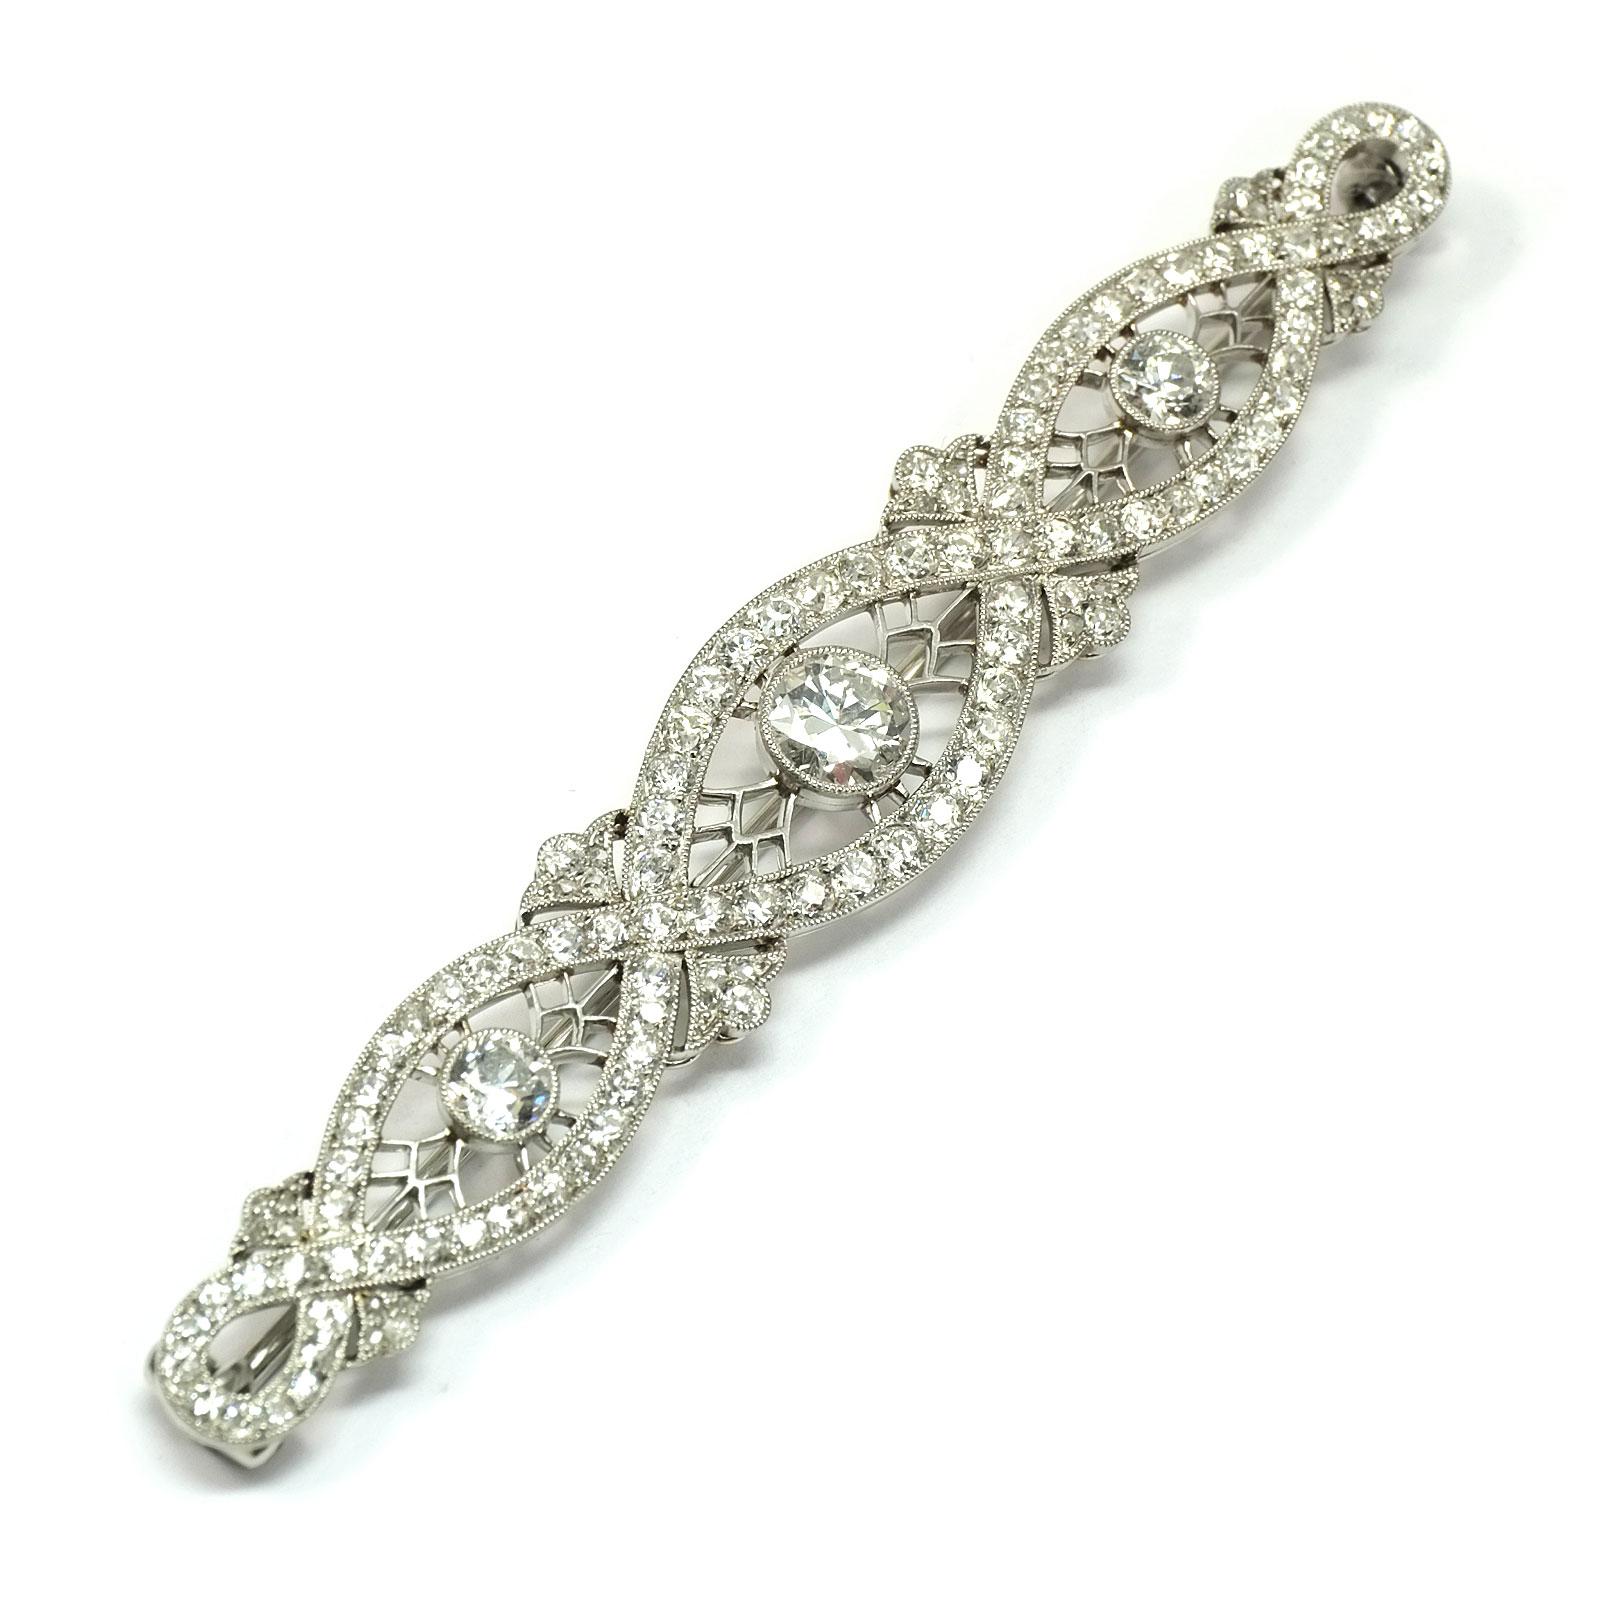 Art Deco 5.2 carat diamond platinum bar brooch circa 1930

This decorative brooch is designed as an elongated pin and geometrically with wavy ribbons and openwork like a grid, set with three central diamonds (0.35ct -0.85ct-0.35ct) and set with a